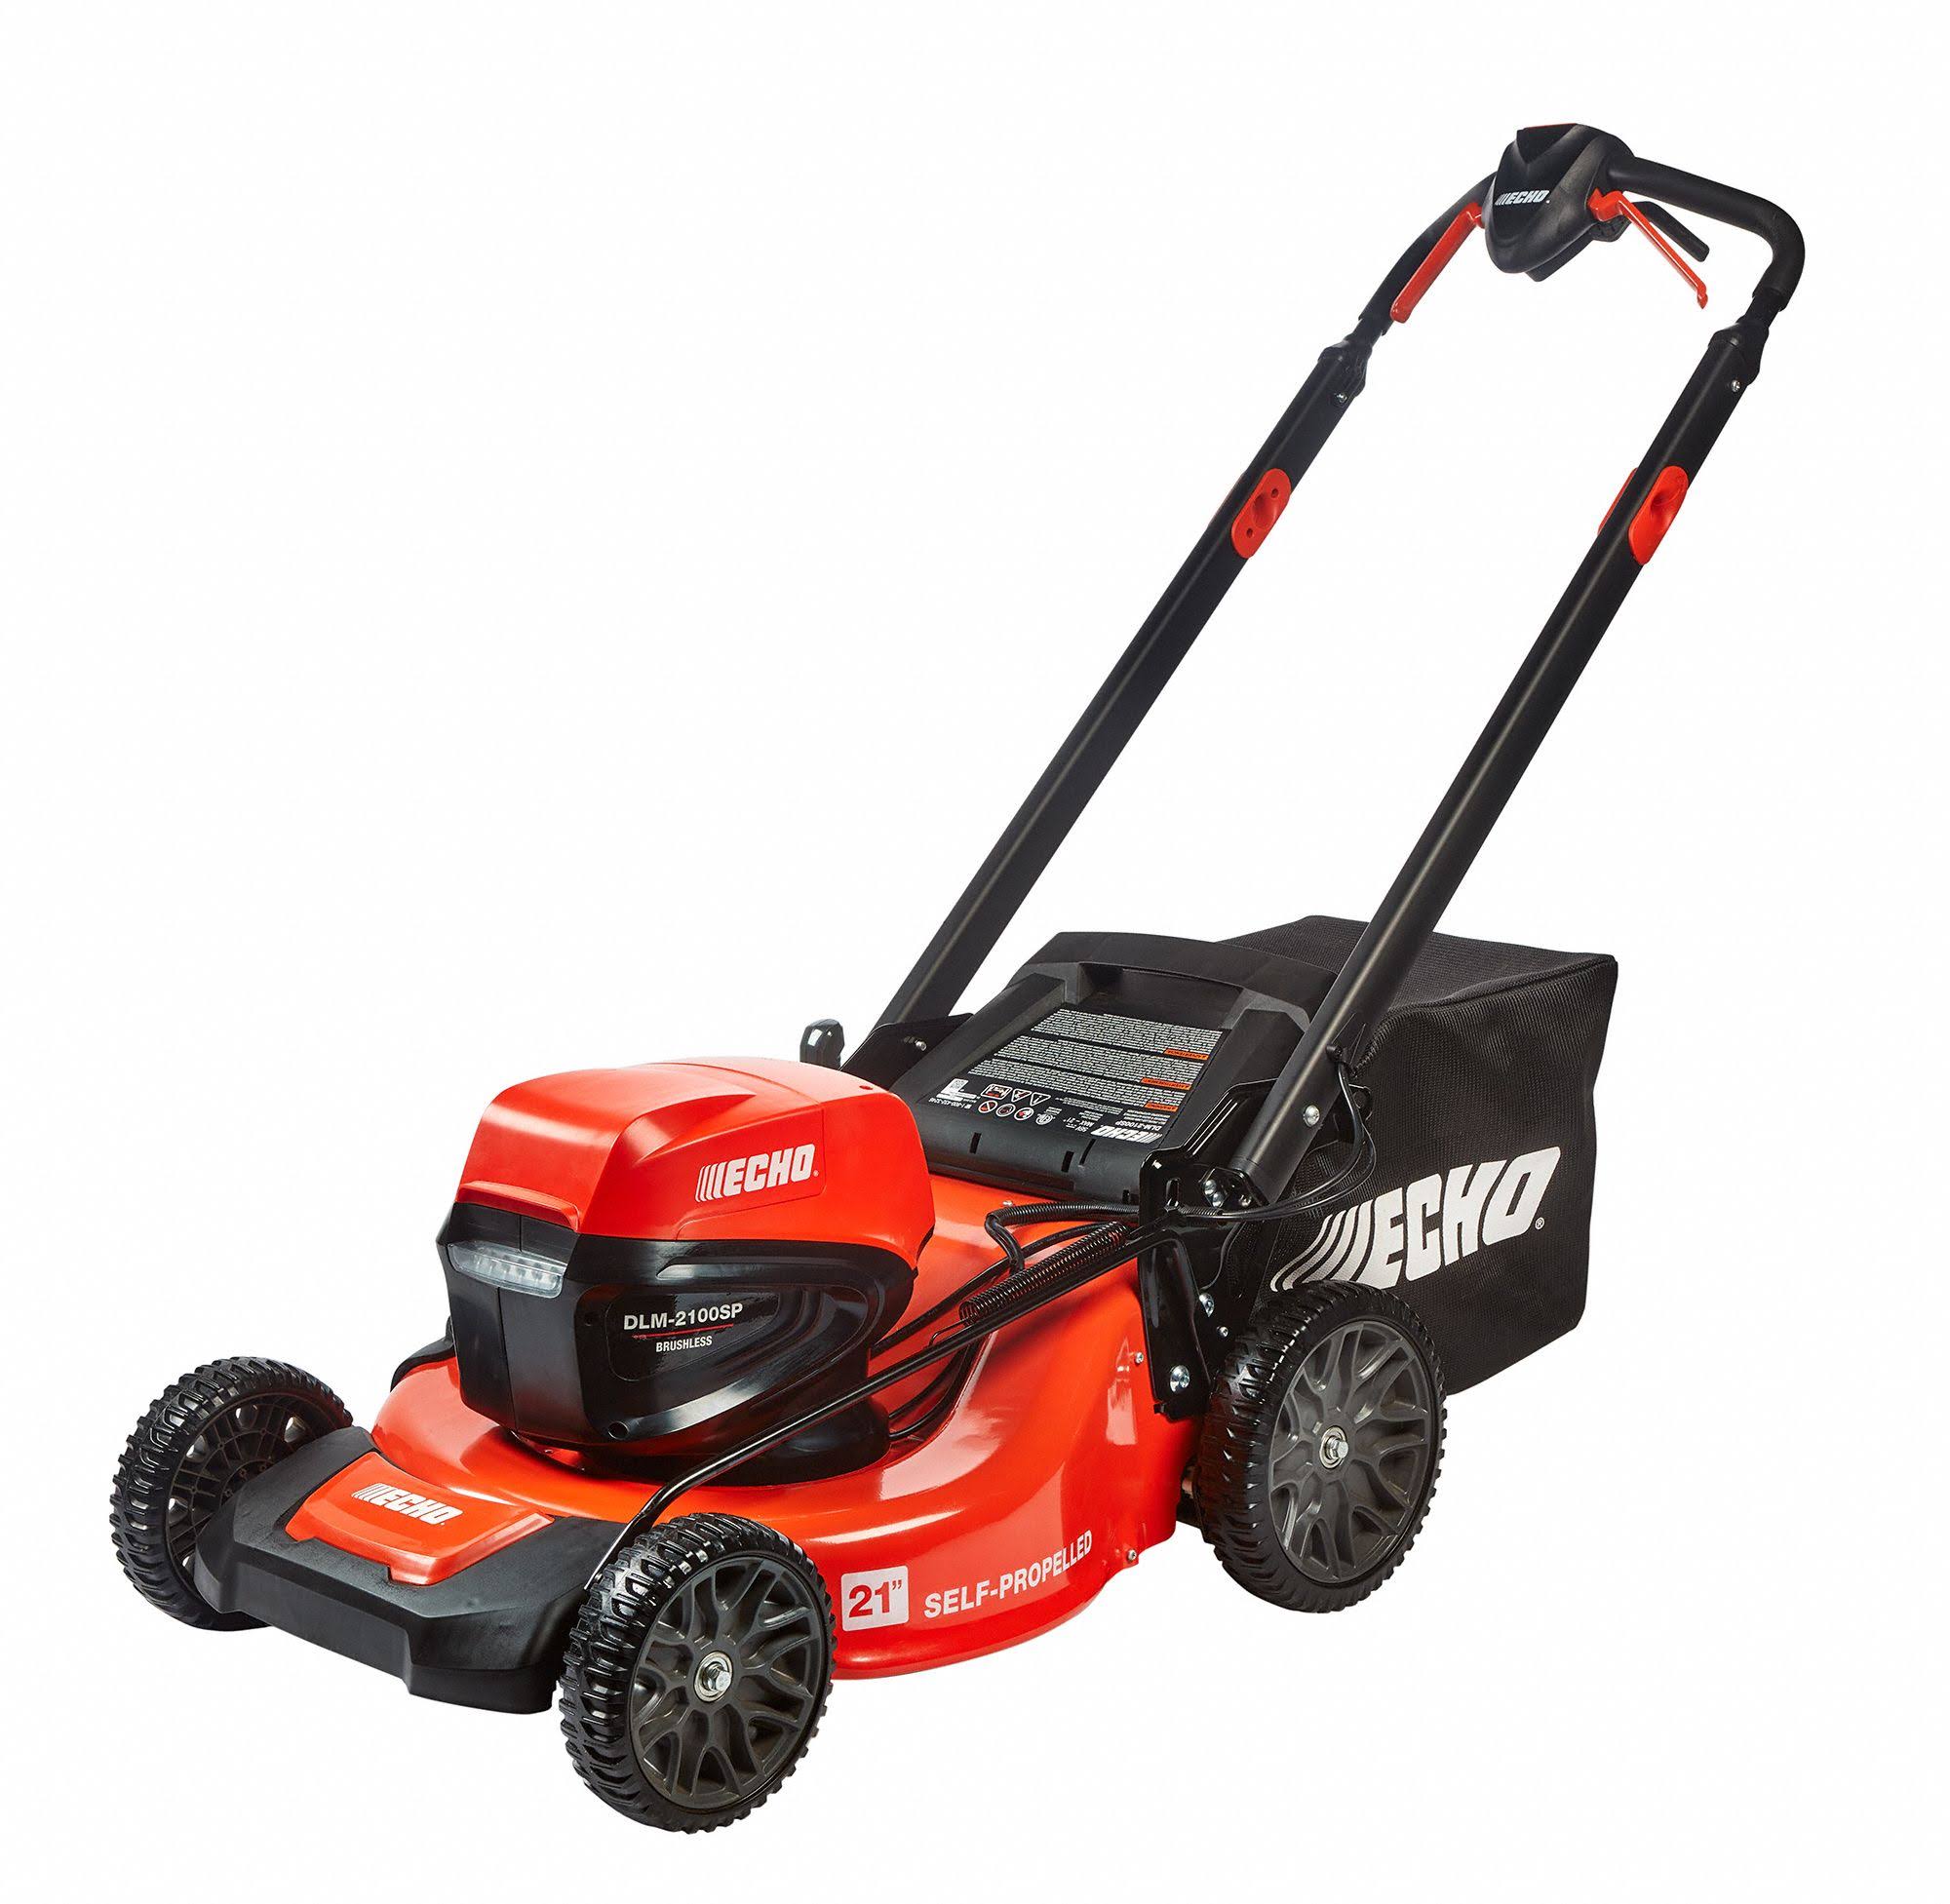 Echo DLM-2100SPC2 eFORCE 56V 21" Cordless Self-Propelled Lawn Mower w/ 5.0Ah Battery & Charger